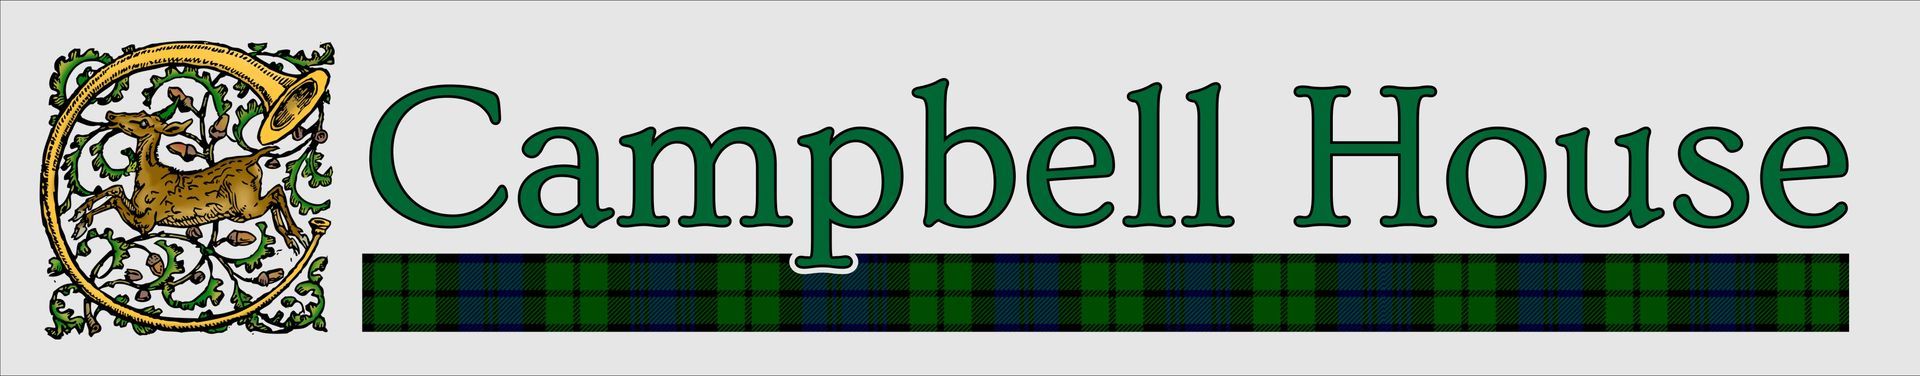 a logo for campbell house with a green border